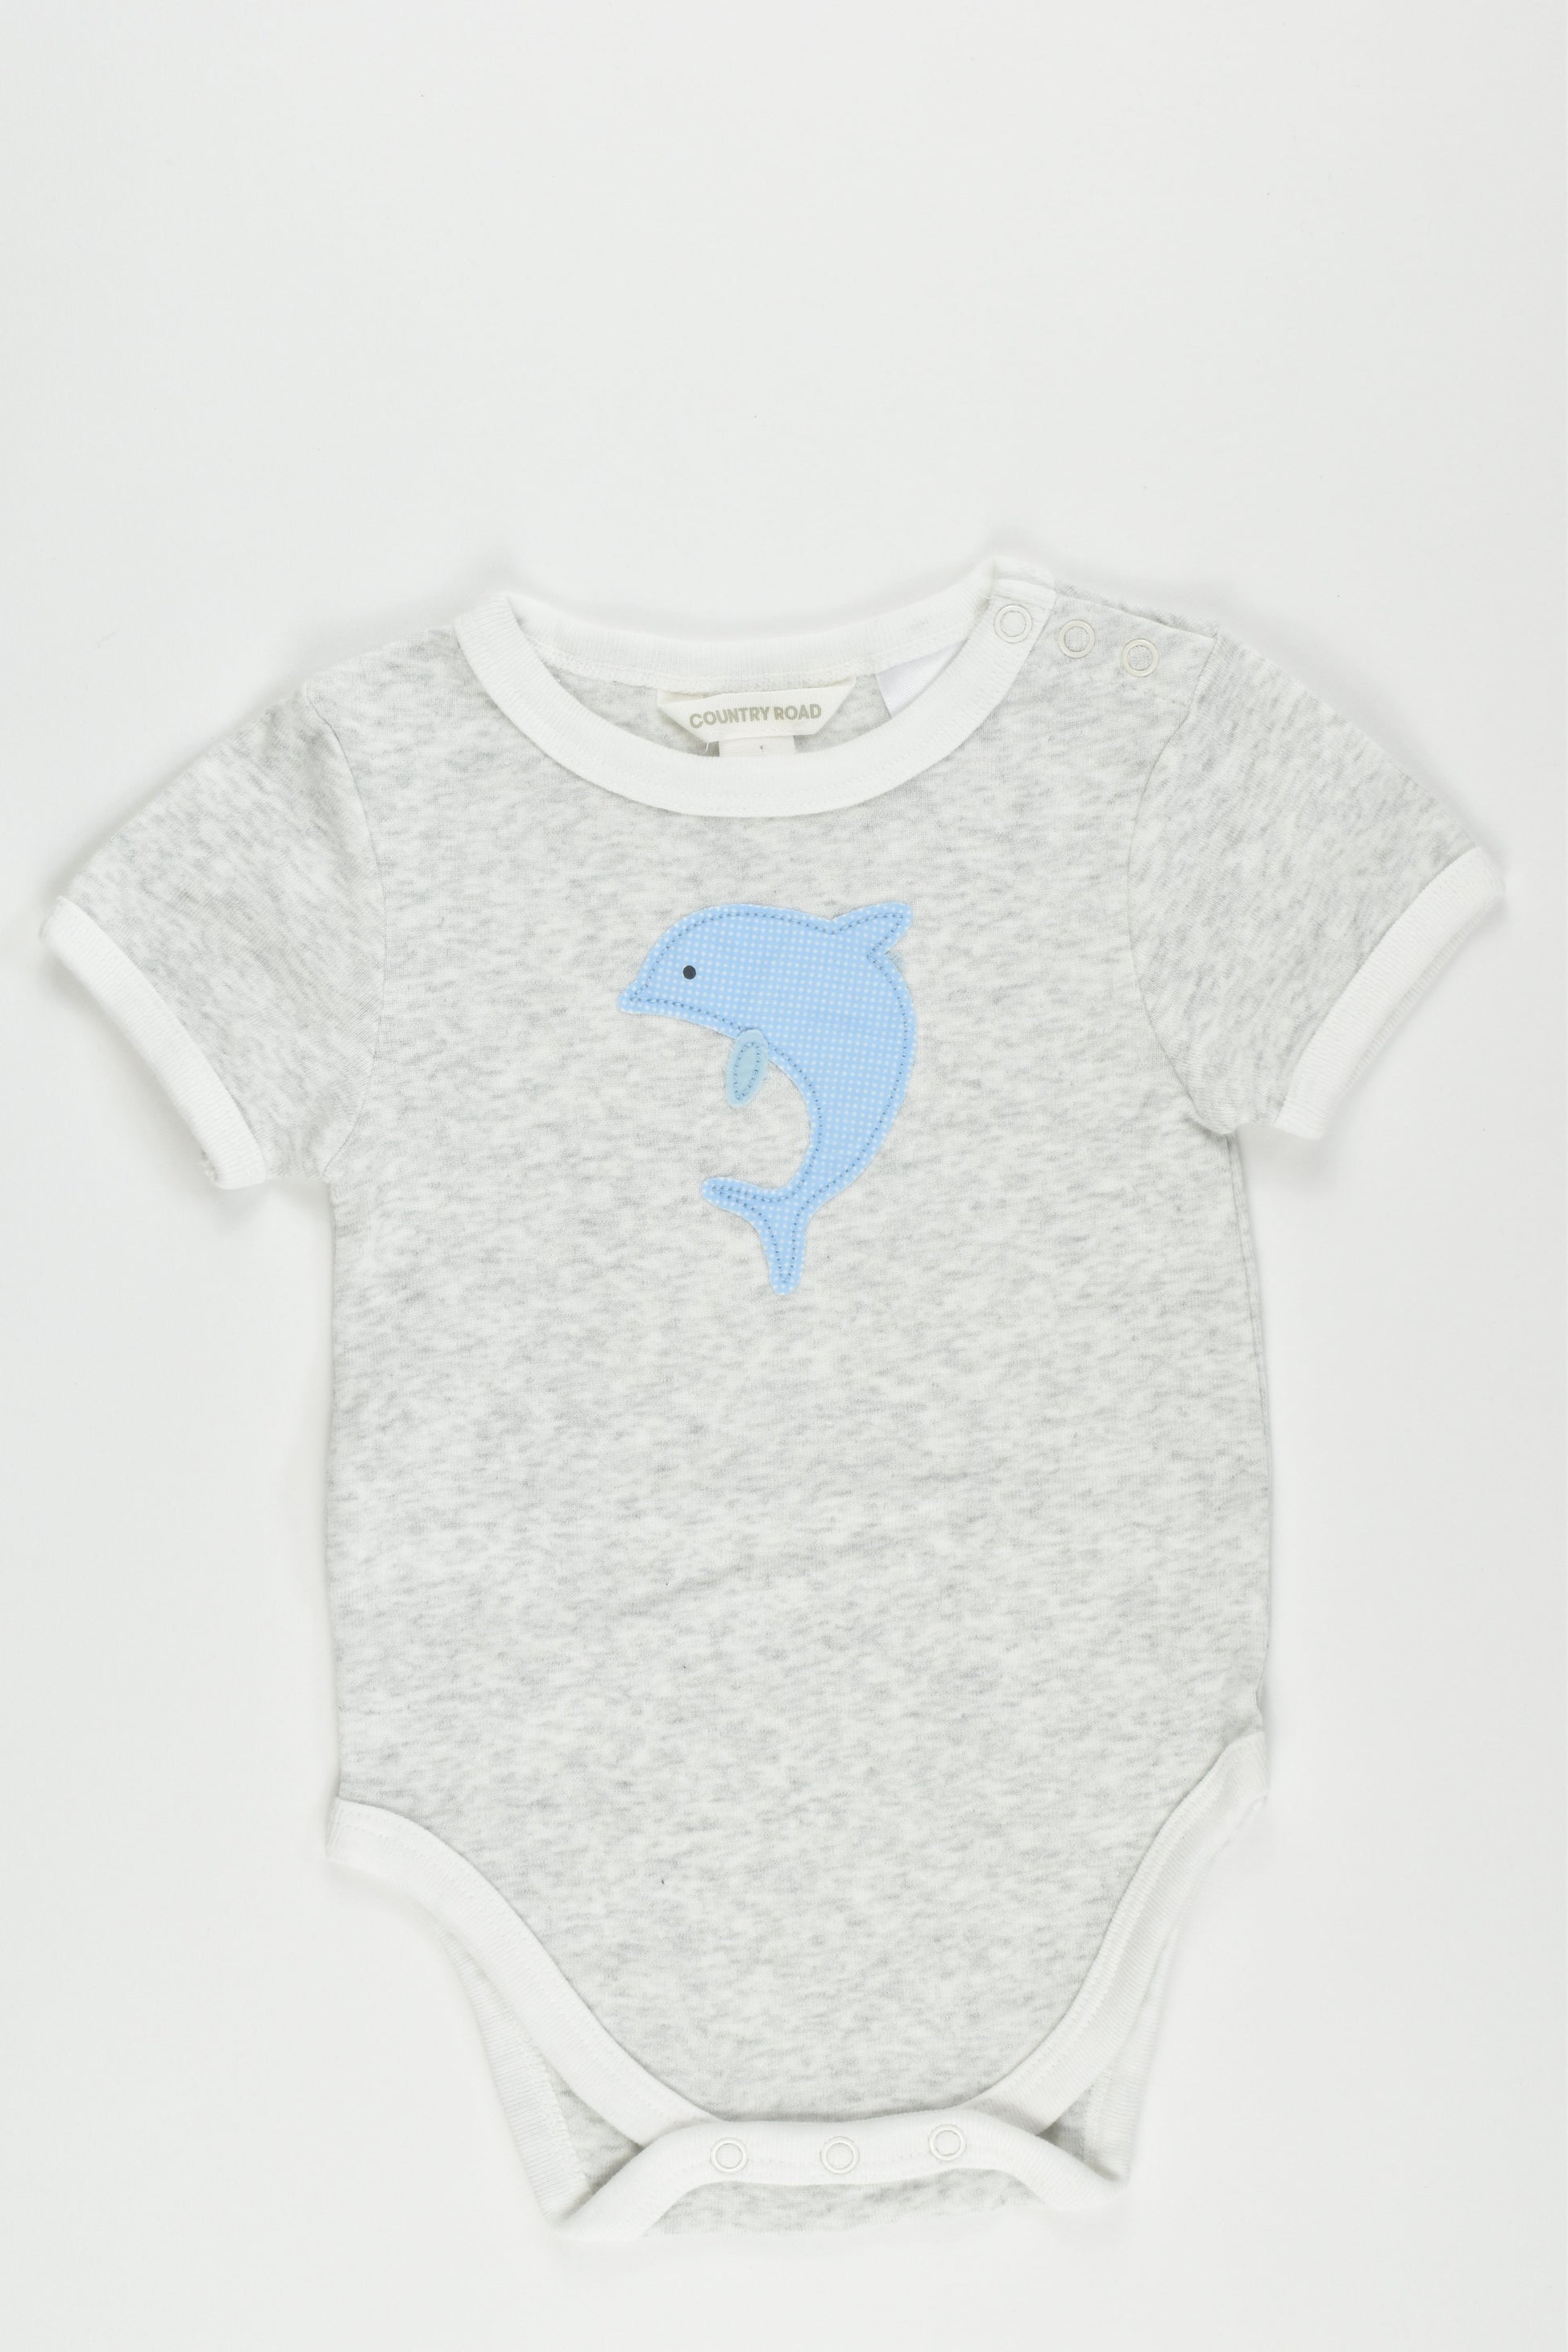 NEW Country Road Size 00 (3-6 months) Bodysuit